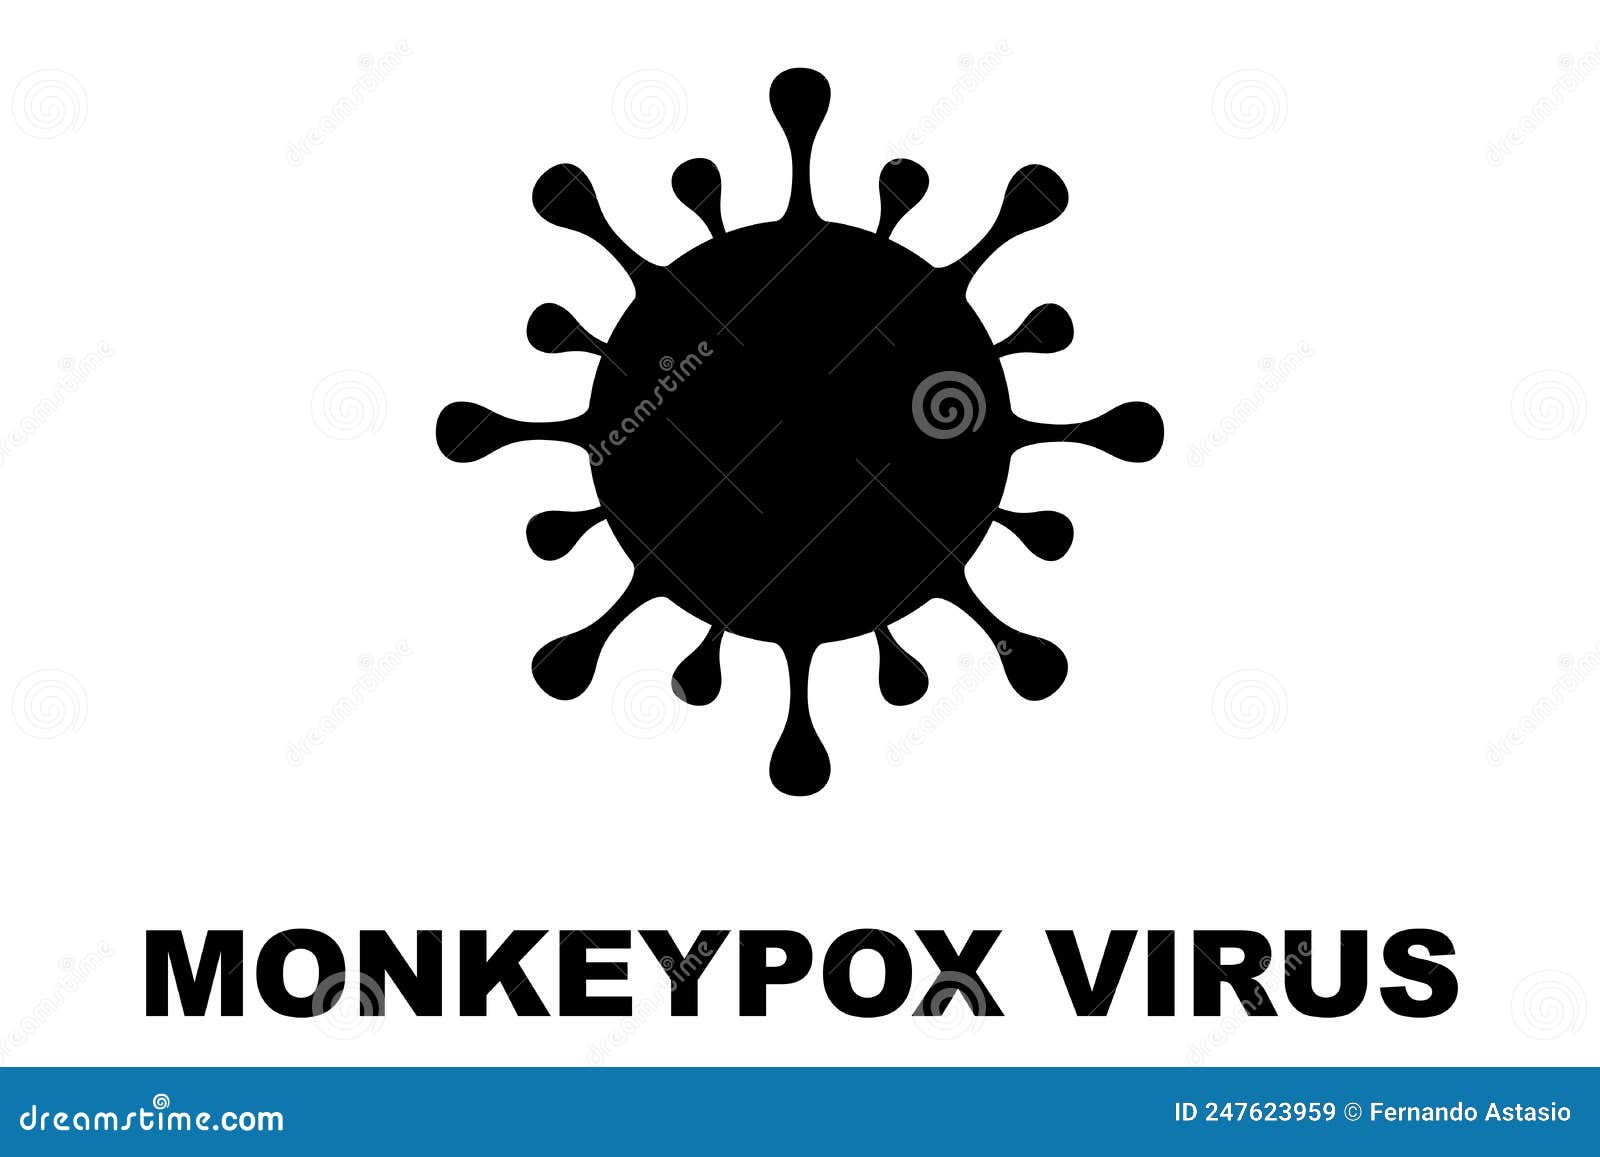 monkeypox virus. monkeypox is a zoonotic viral disease that can infect nonhuman primates, rodents, and some other mammals.